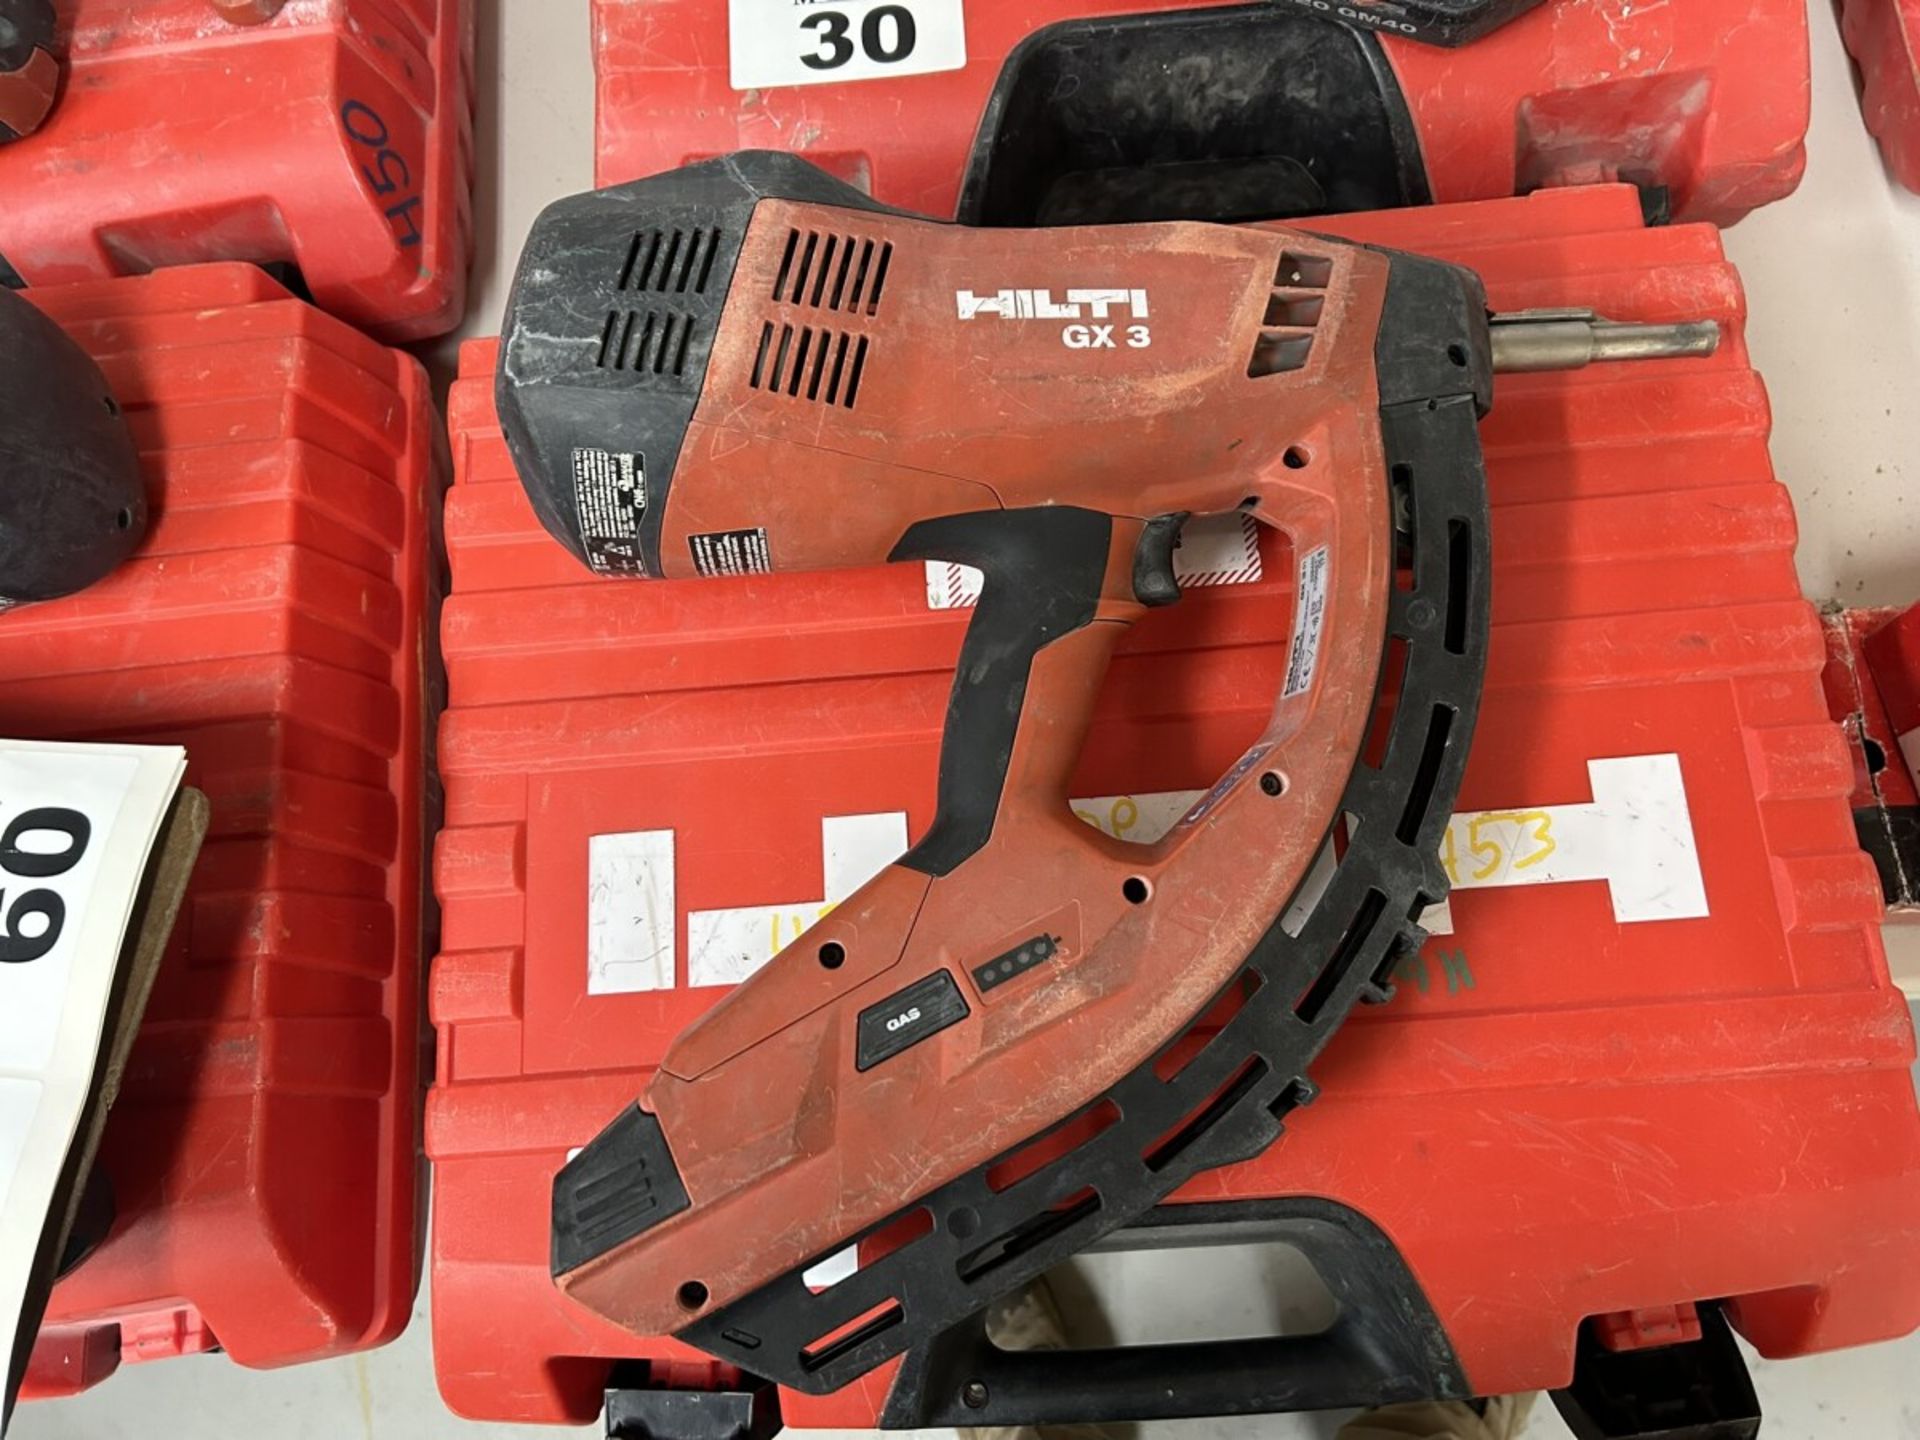 HILTI GX 3 GAS-ACTUATED FASTENING TOOL GAS NAILER WITH SINGLE POWER SOURCE FOR DRYWALL TRACK, - Image 4 of 7